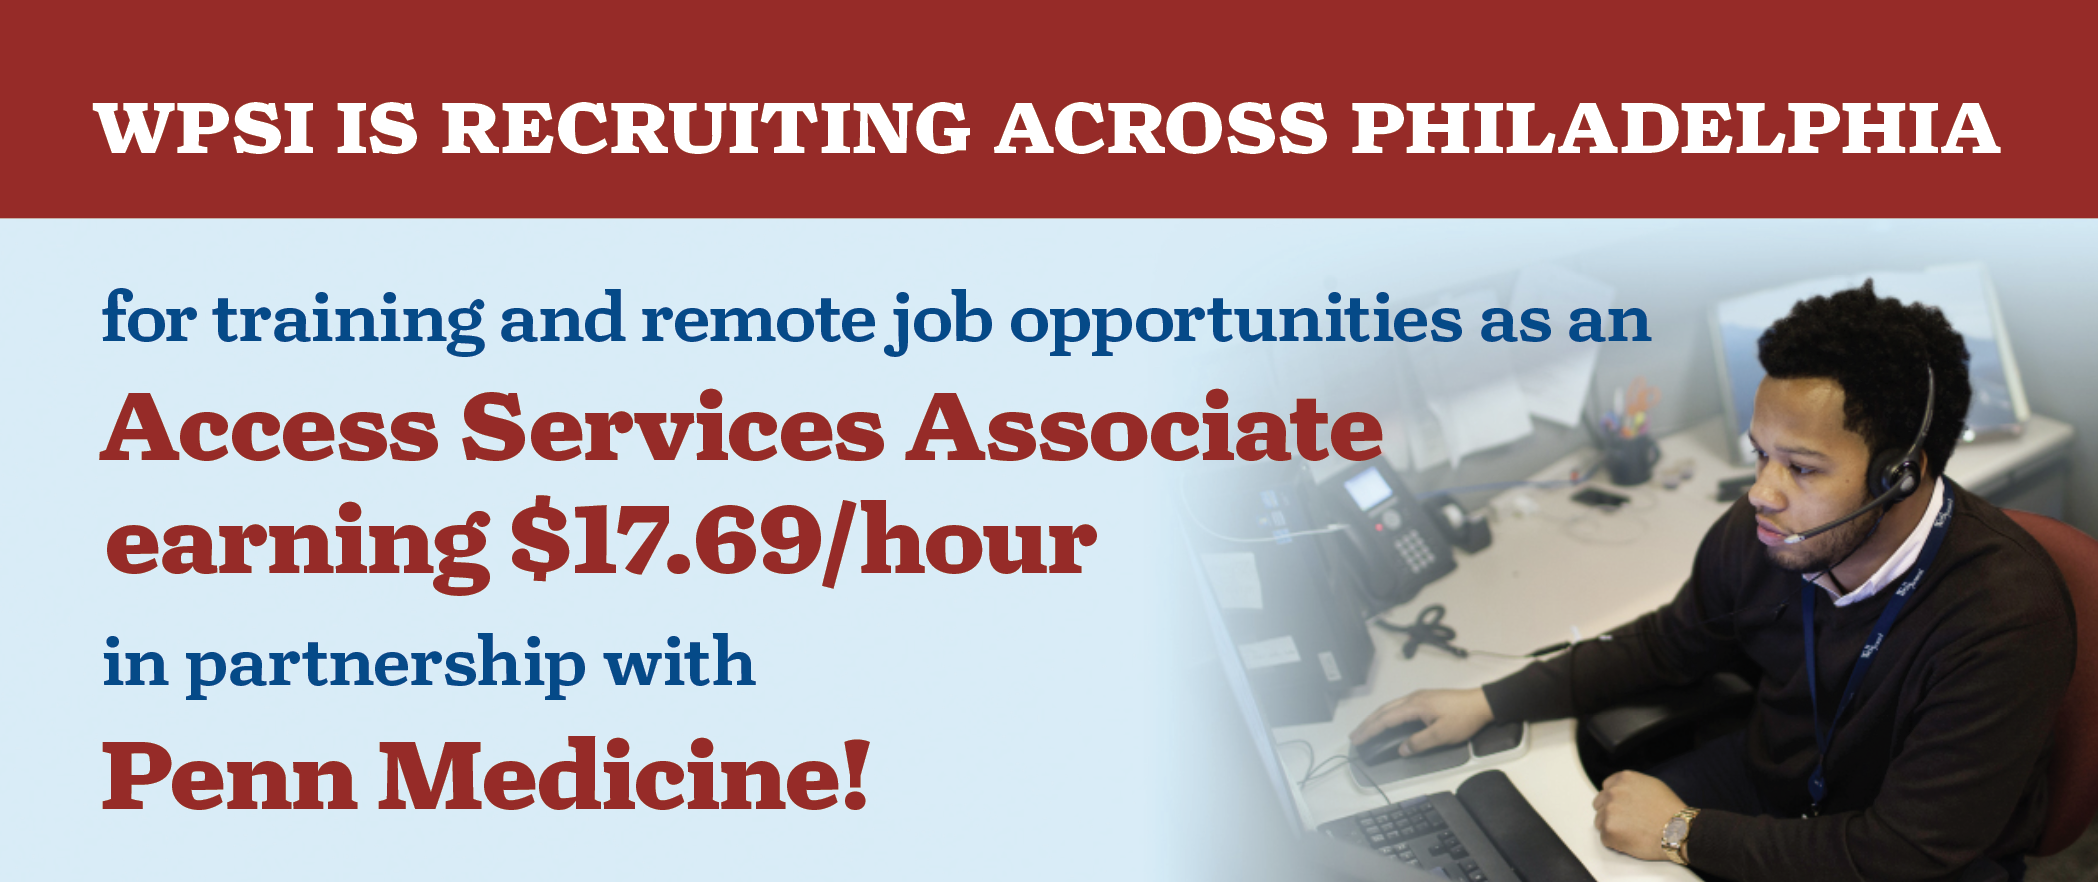 WPSI IS RECRUITING ACROSS PHILADELPHIA for training and remote job opportunities as an Access Services Associate earning $17.69/hour in partnership with Penn Medicine!